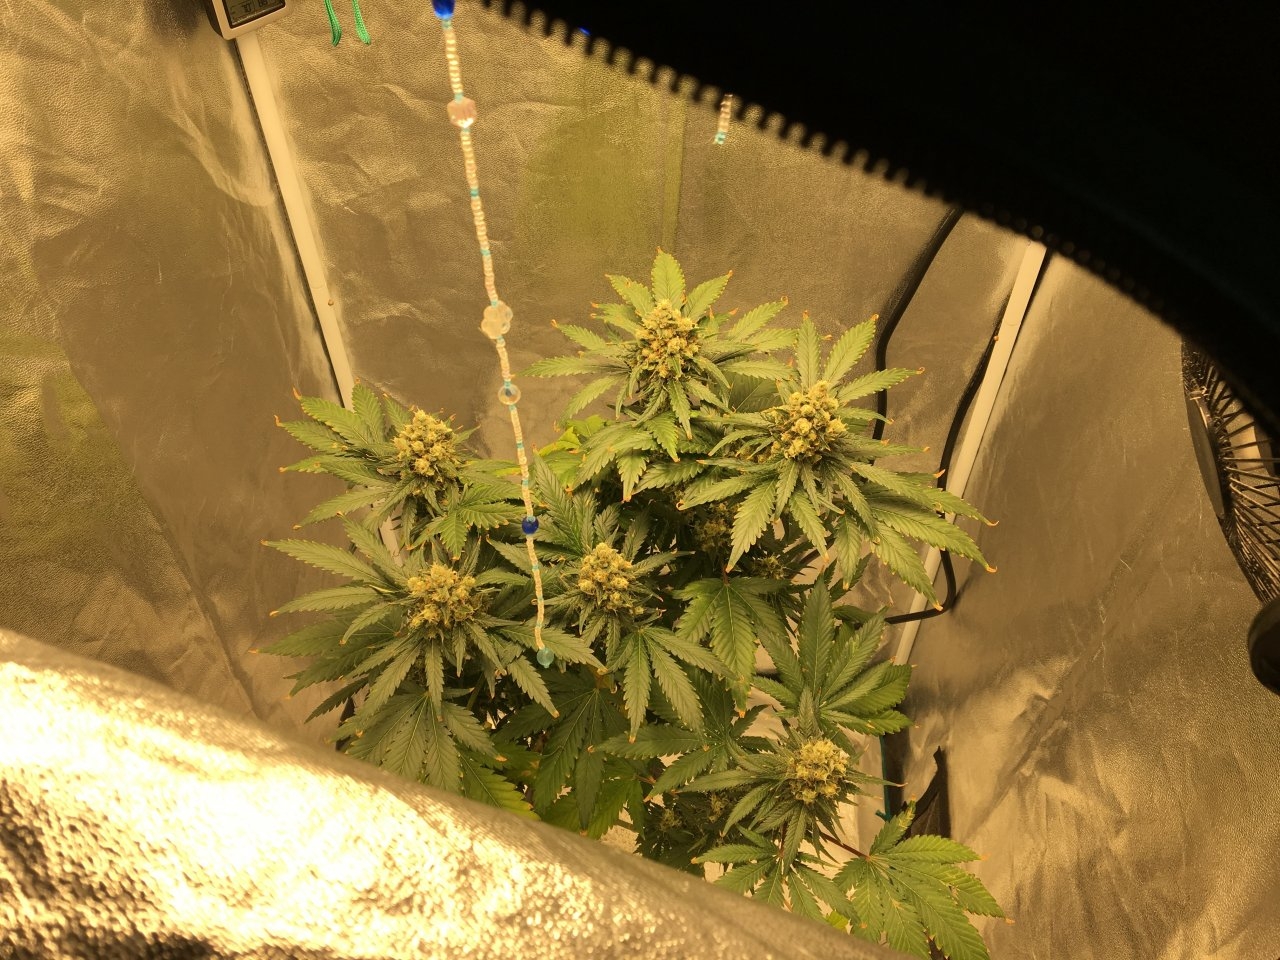 Candy Cane 5 (Day 90, flip + 50)